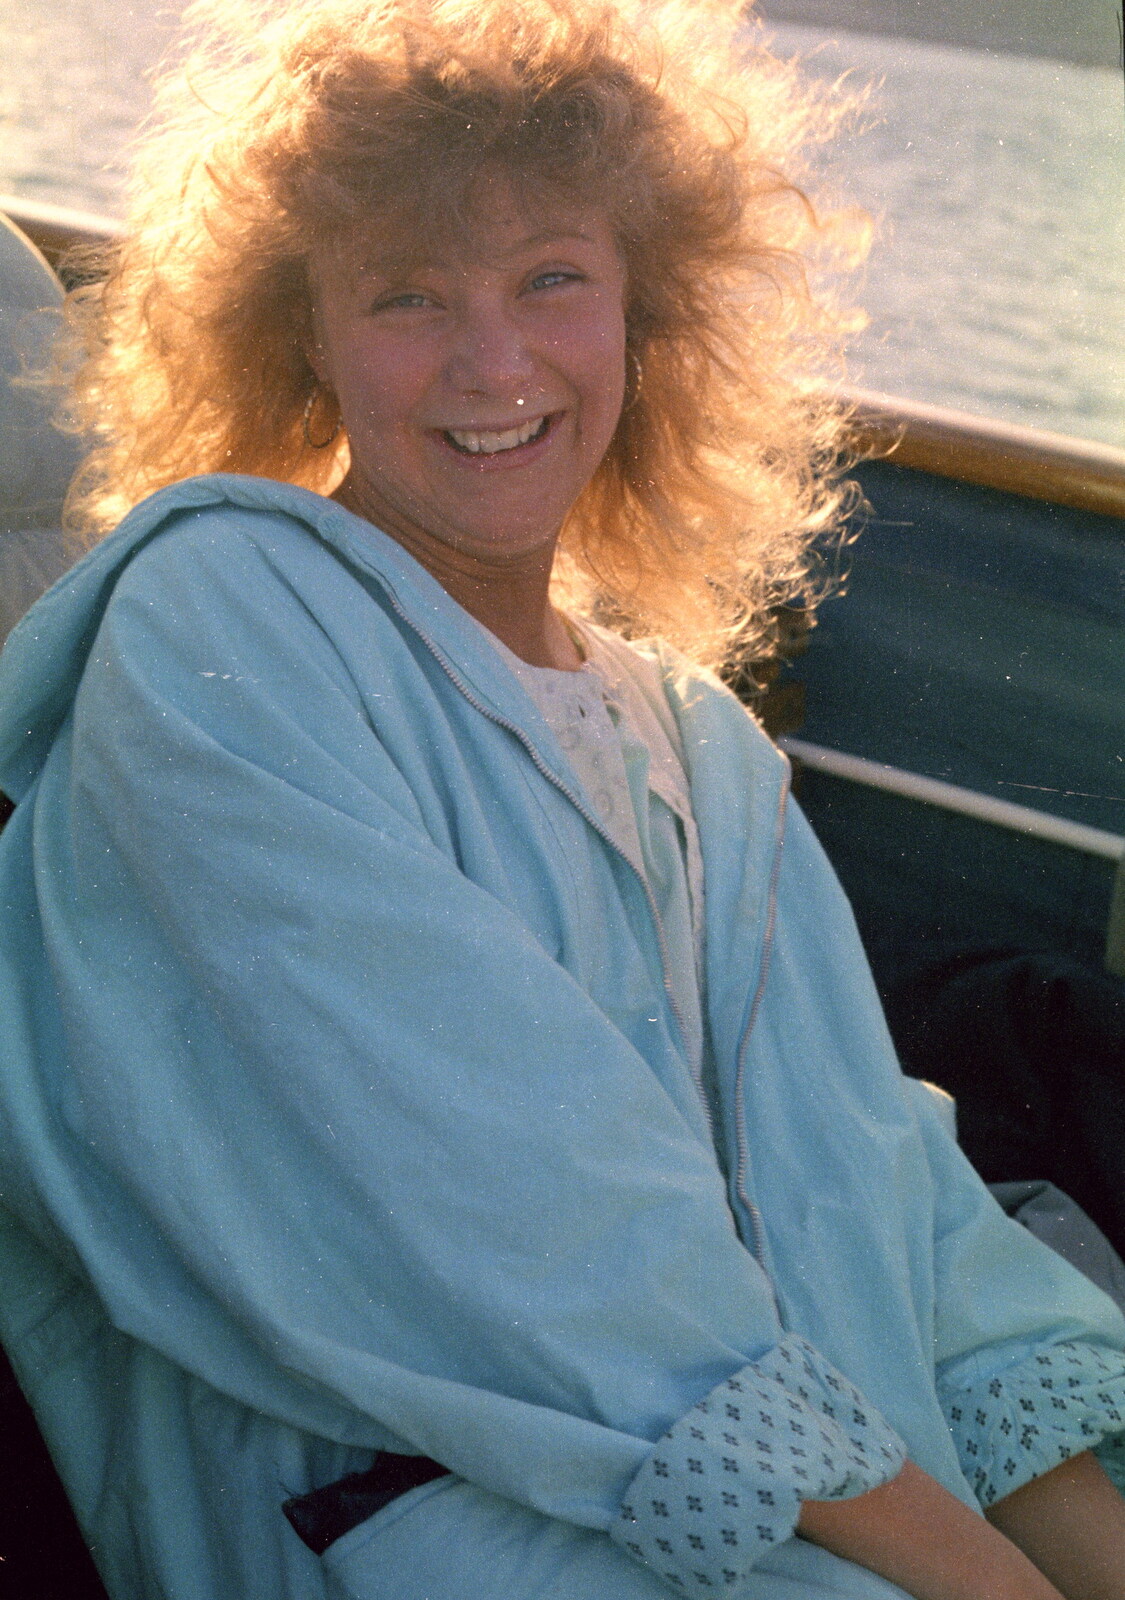 Another mystery student from Uni: A Student Booze Cruise, Plymouth Sound, Devon - 2nd May 1986